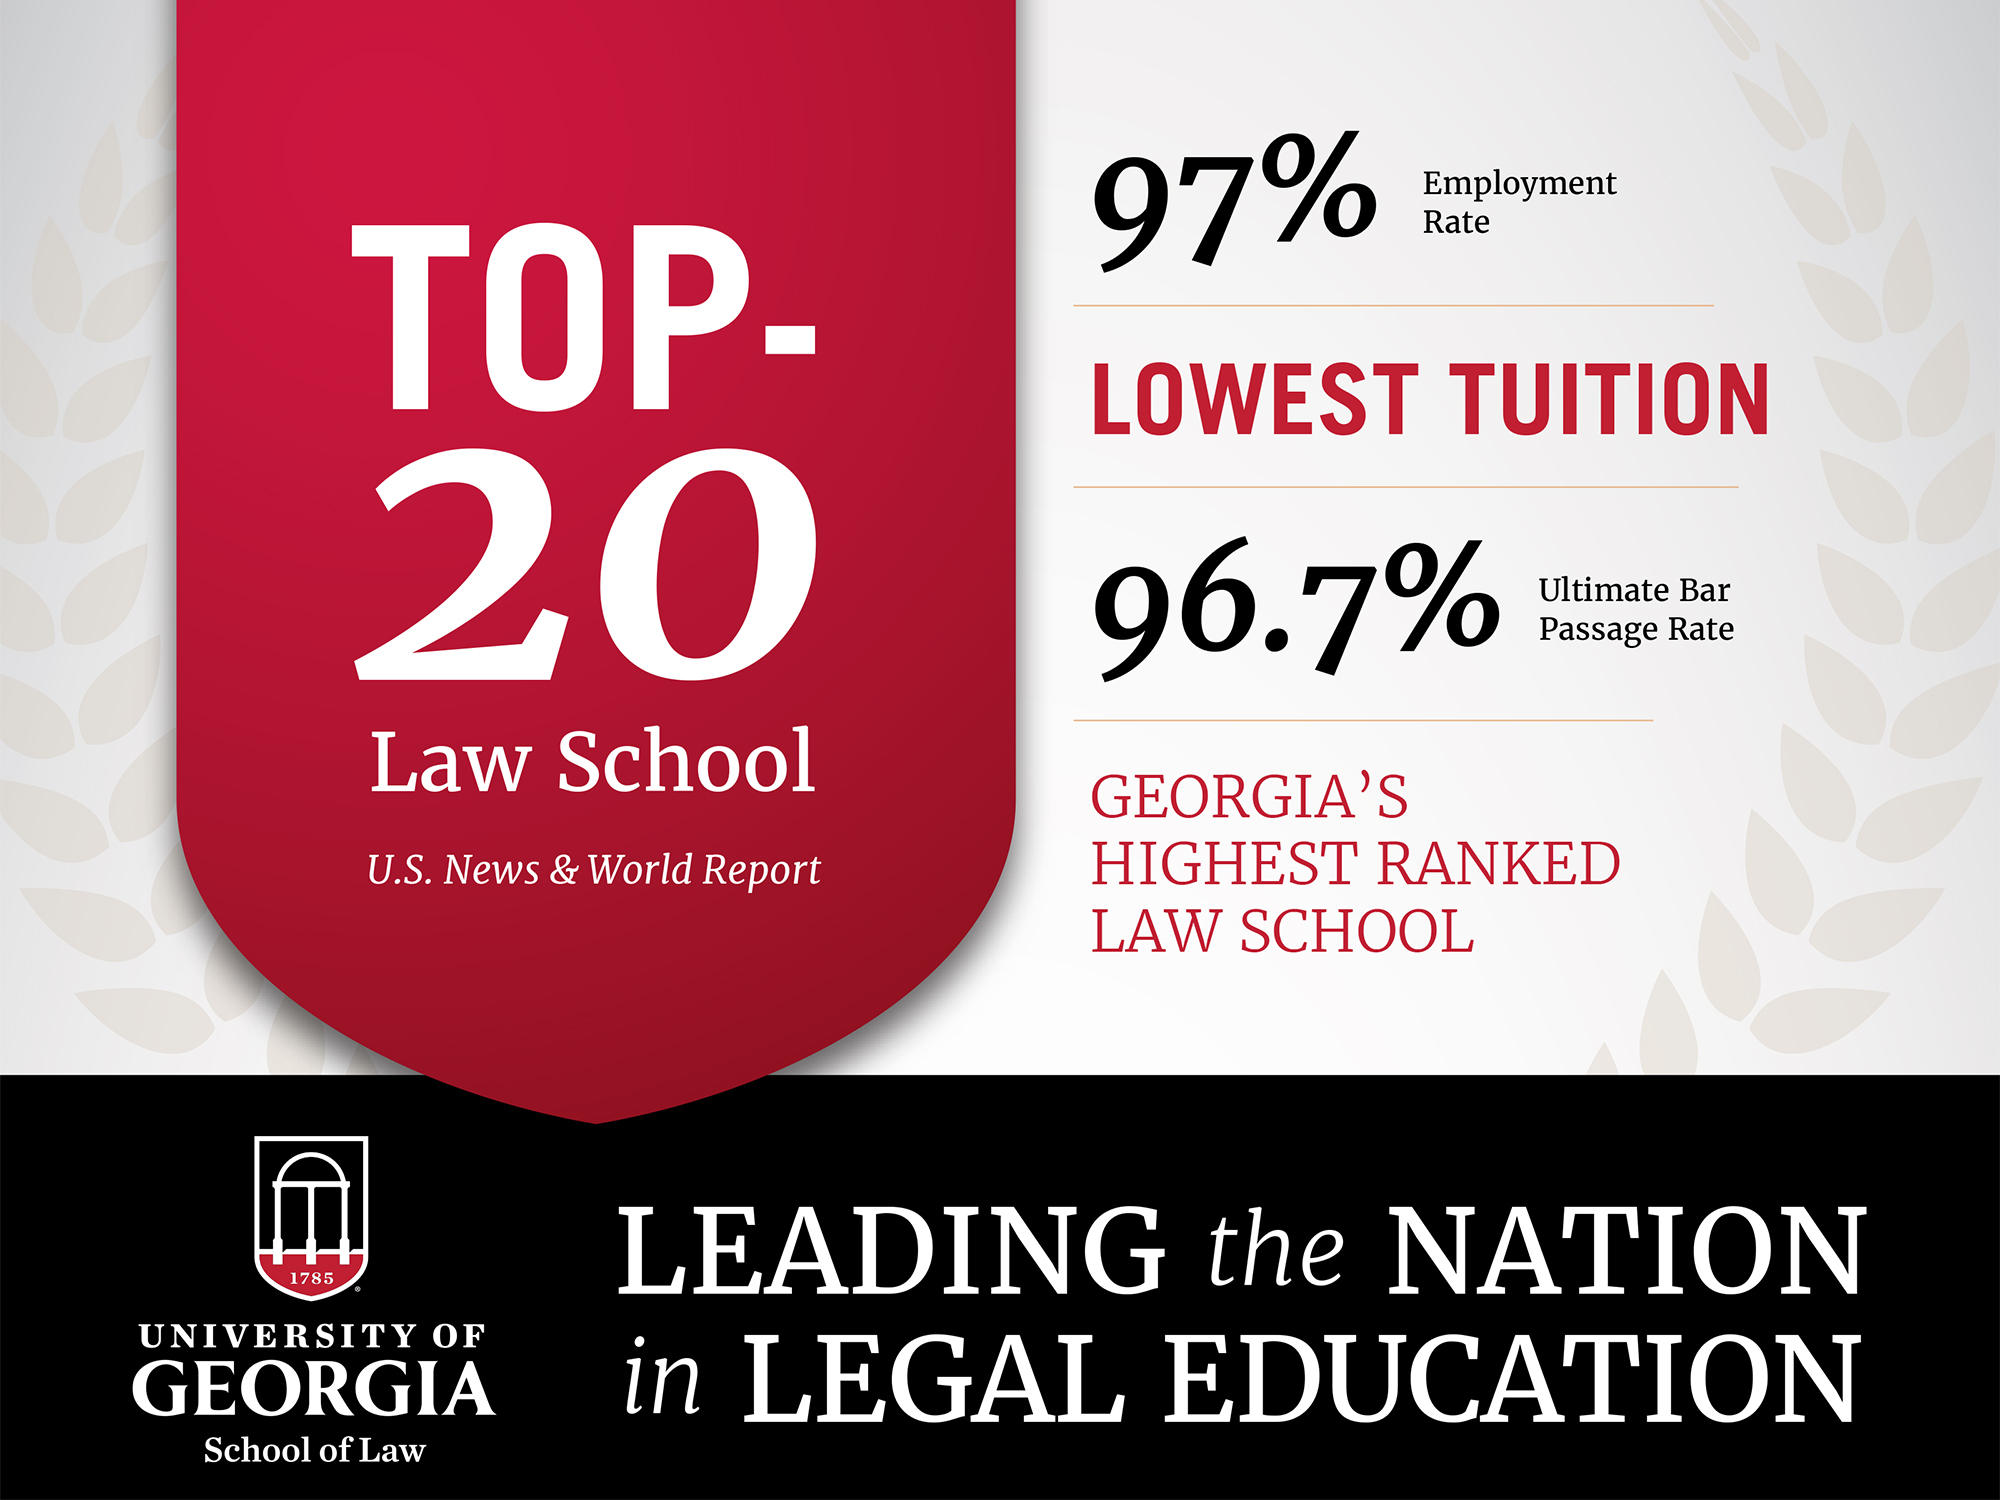 Redefining what it means to be a great national law school